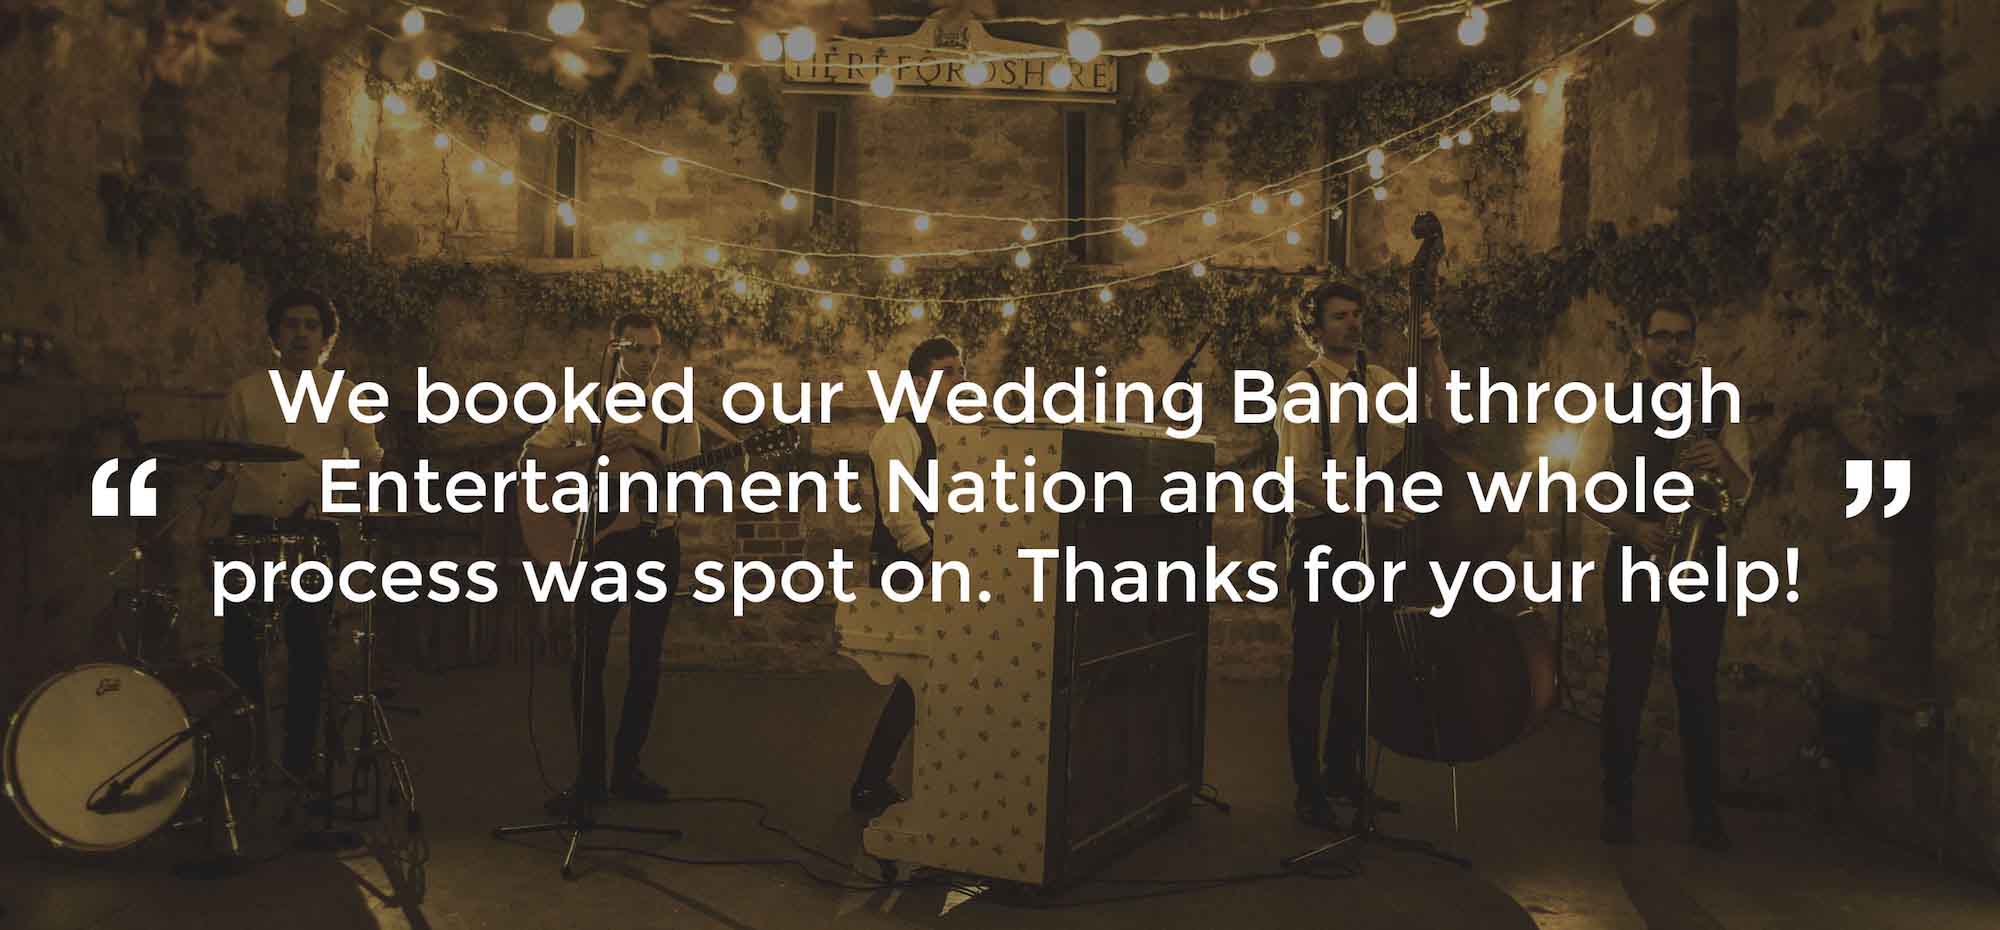 Client Review of a Wedding Band Isle Of Wight